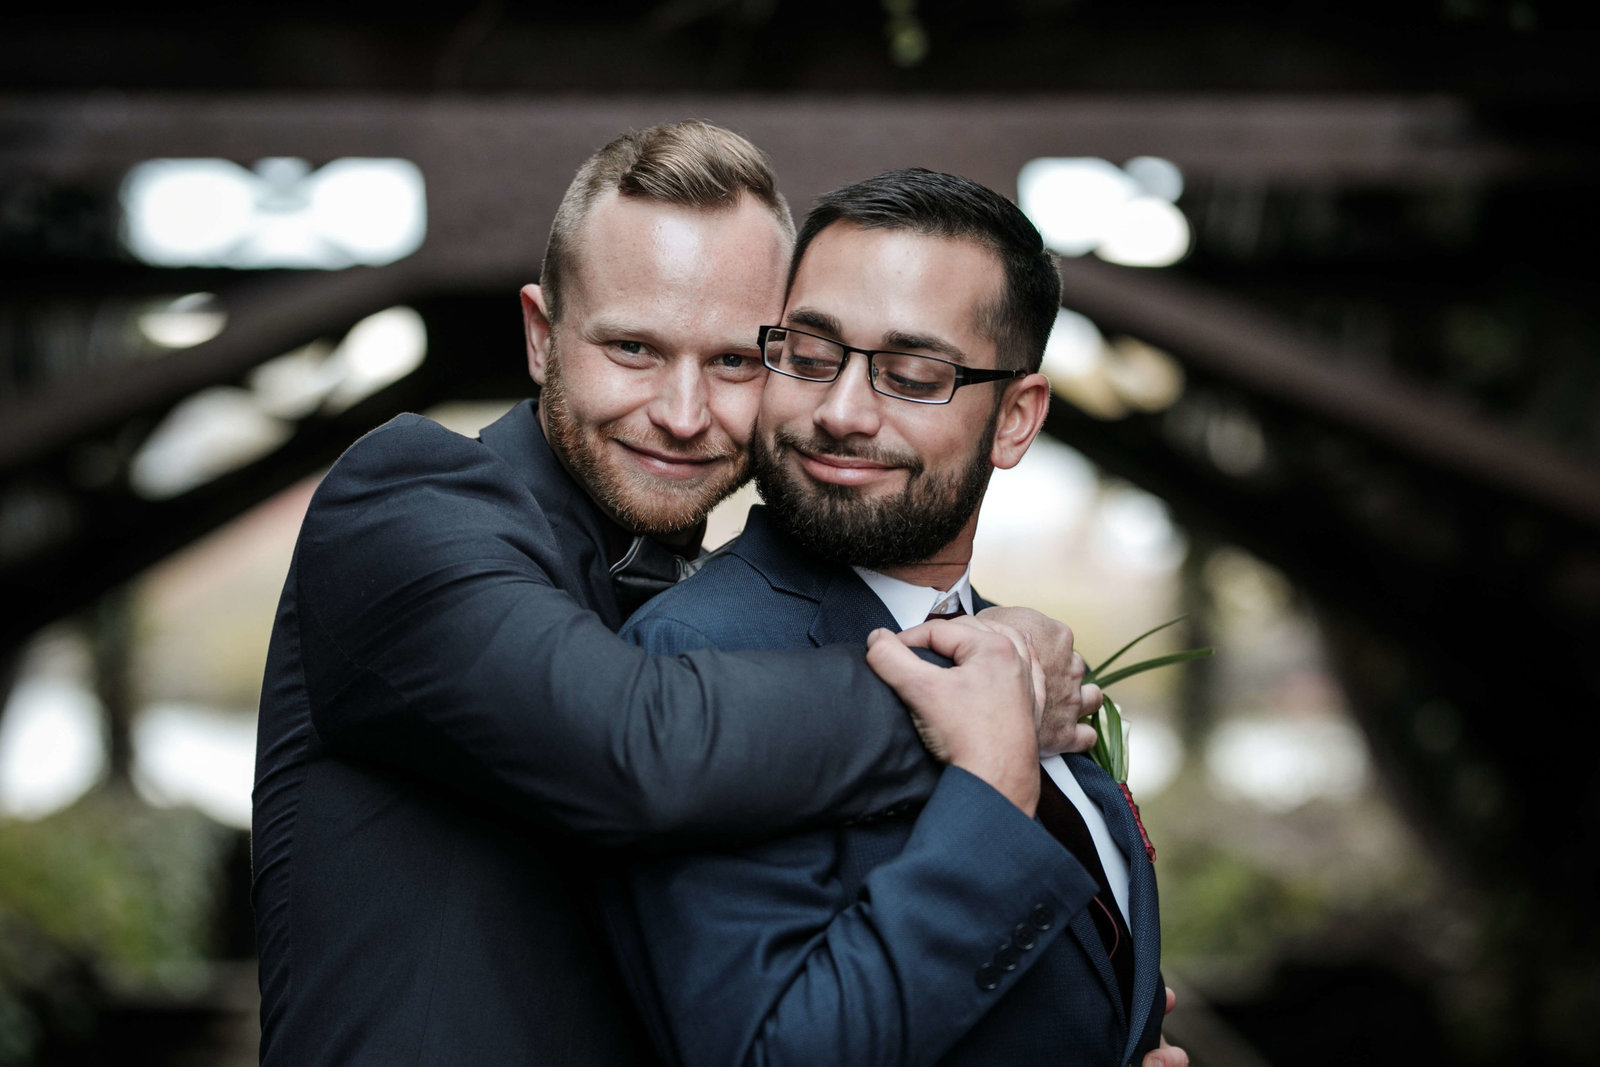 Two grooms embrace at Ohio wedding